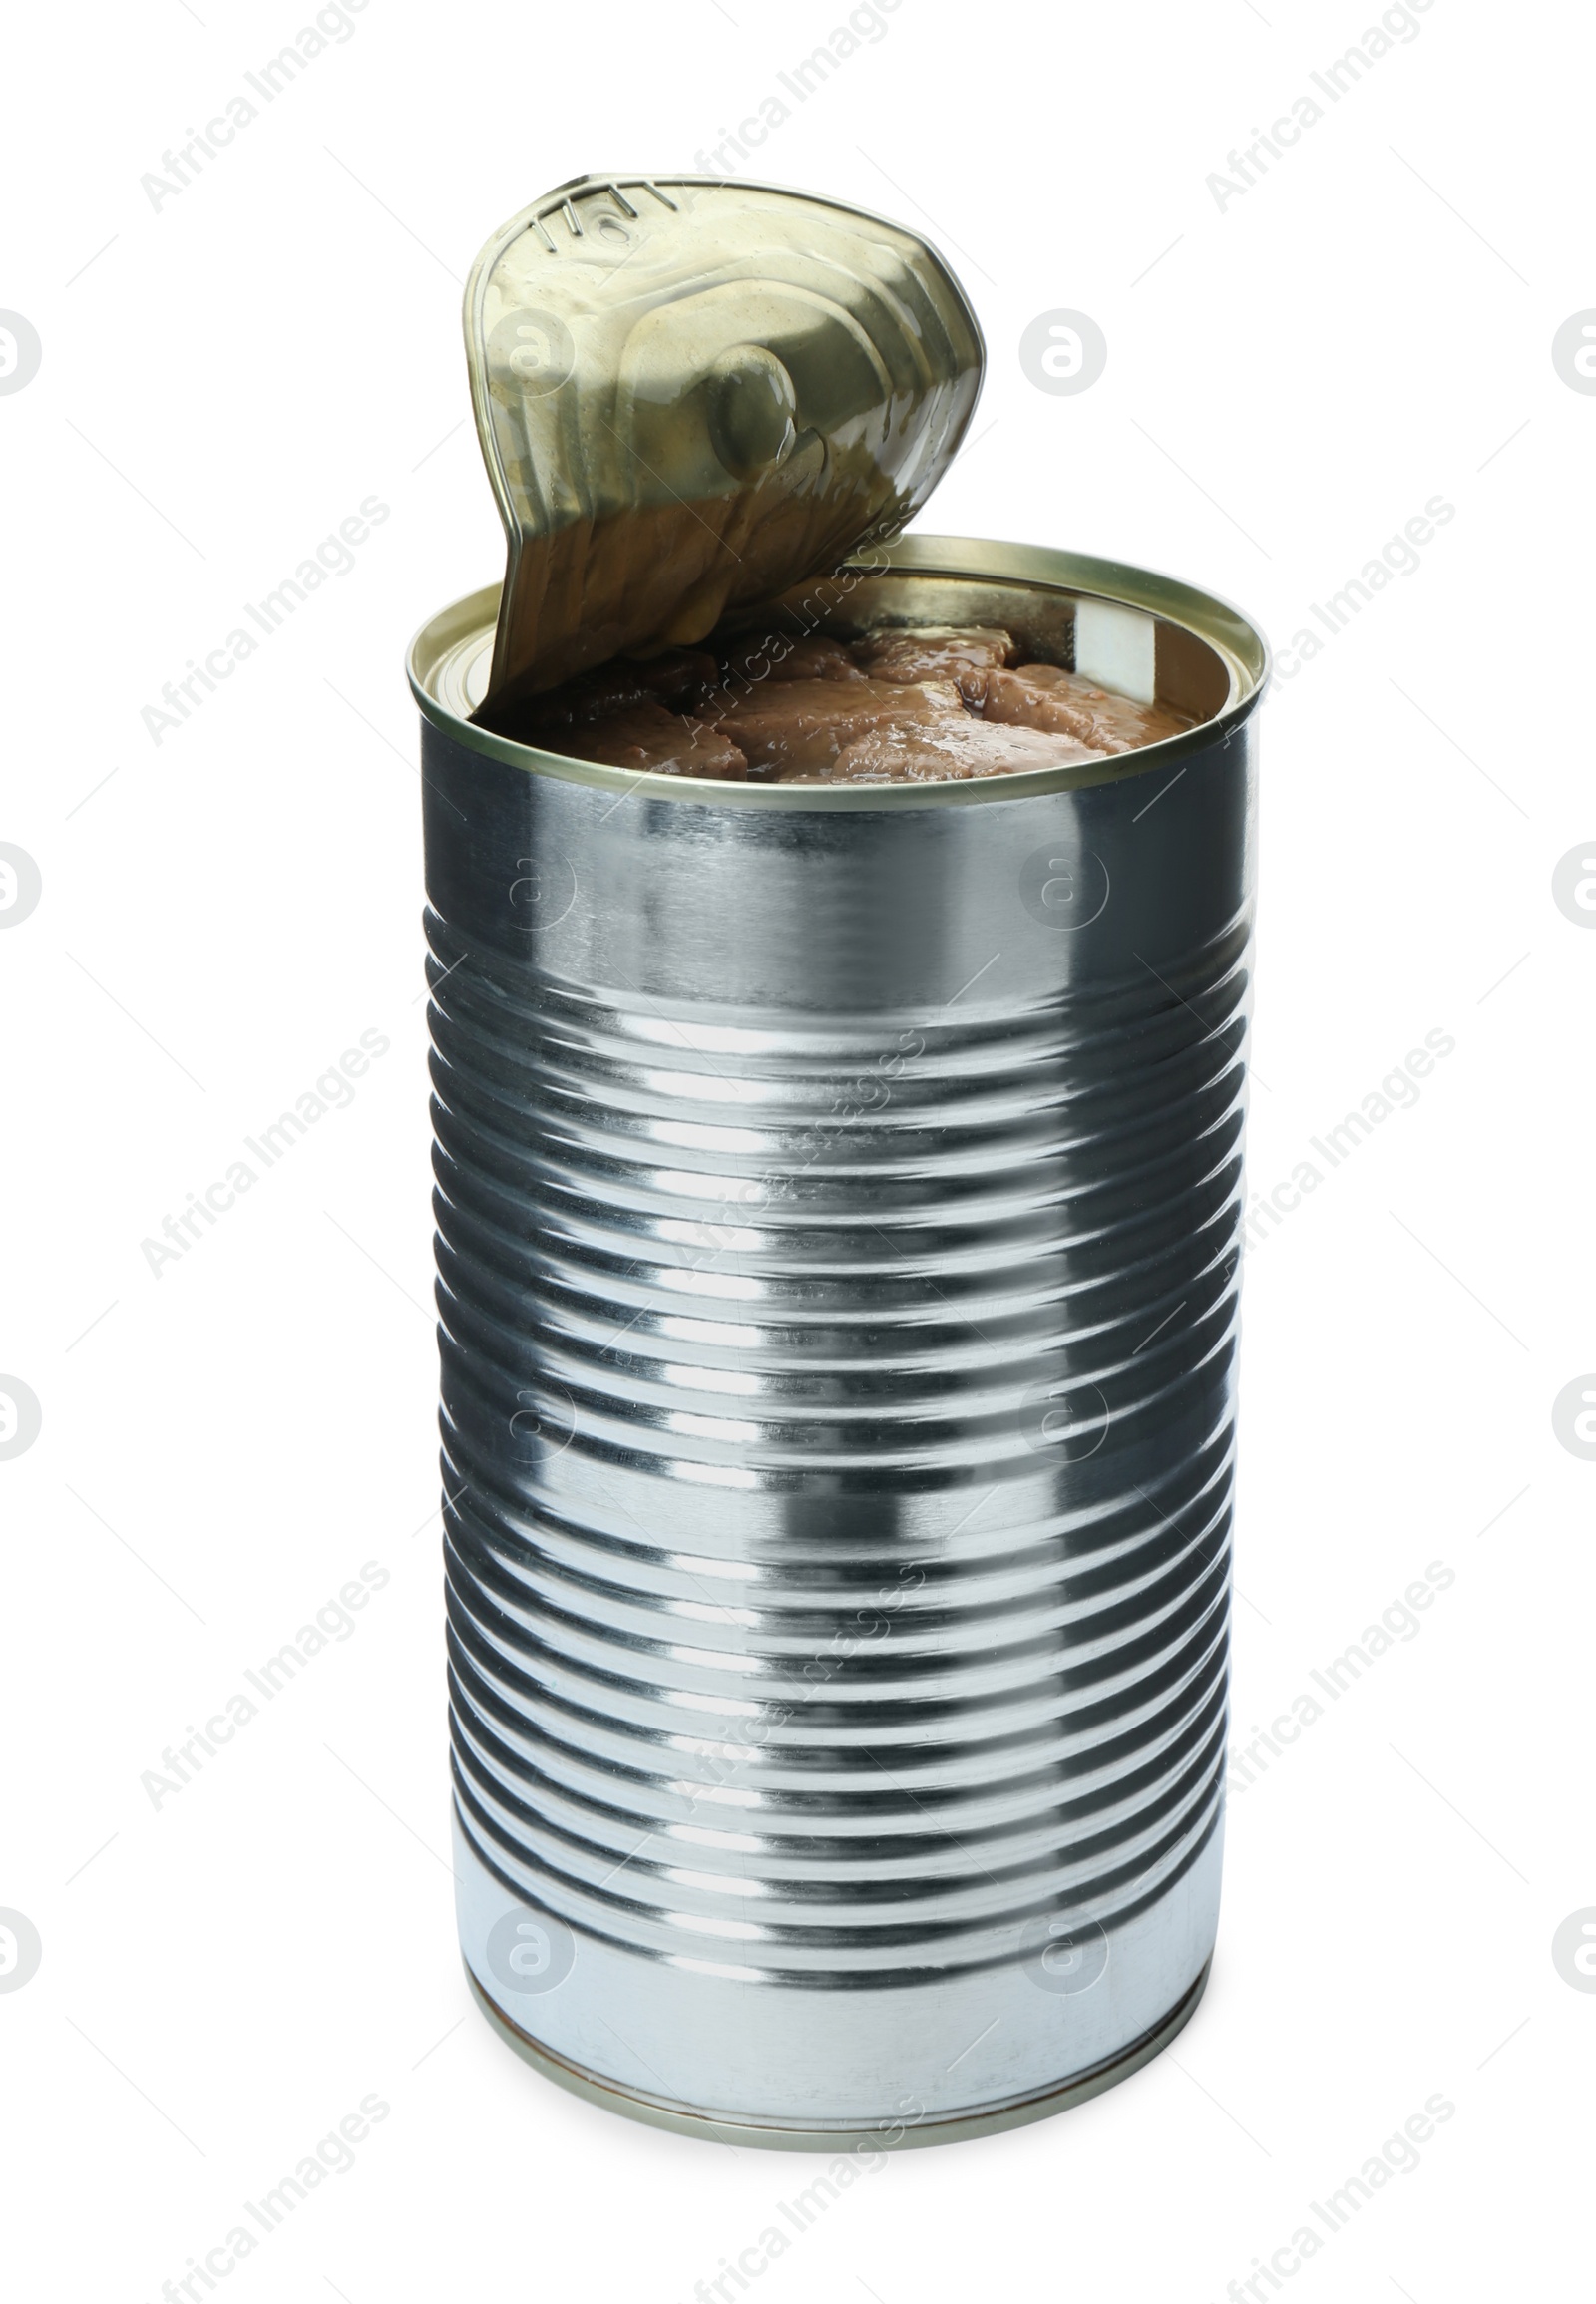 Photo of Tin can of wet pet food isolated on white